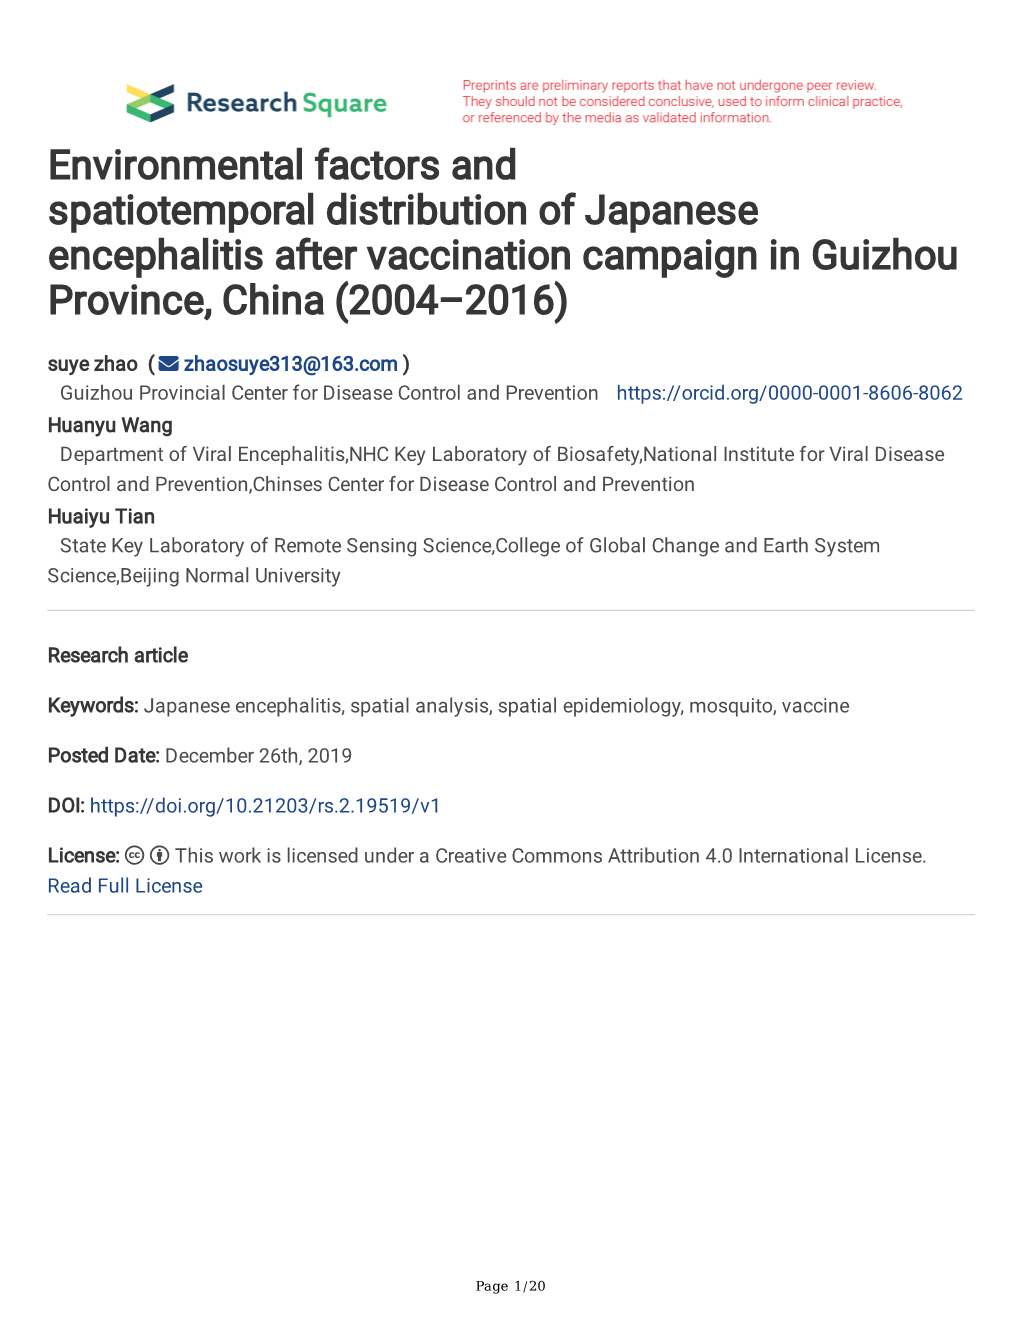 Environmental Factors and Spatiotemporal Distribution of Japanese Encephalitis After Vaccination Campaign in Guizhou Province, C